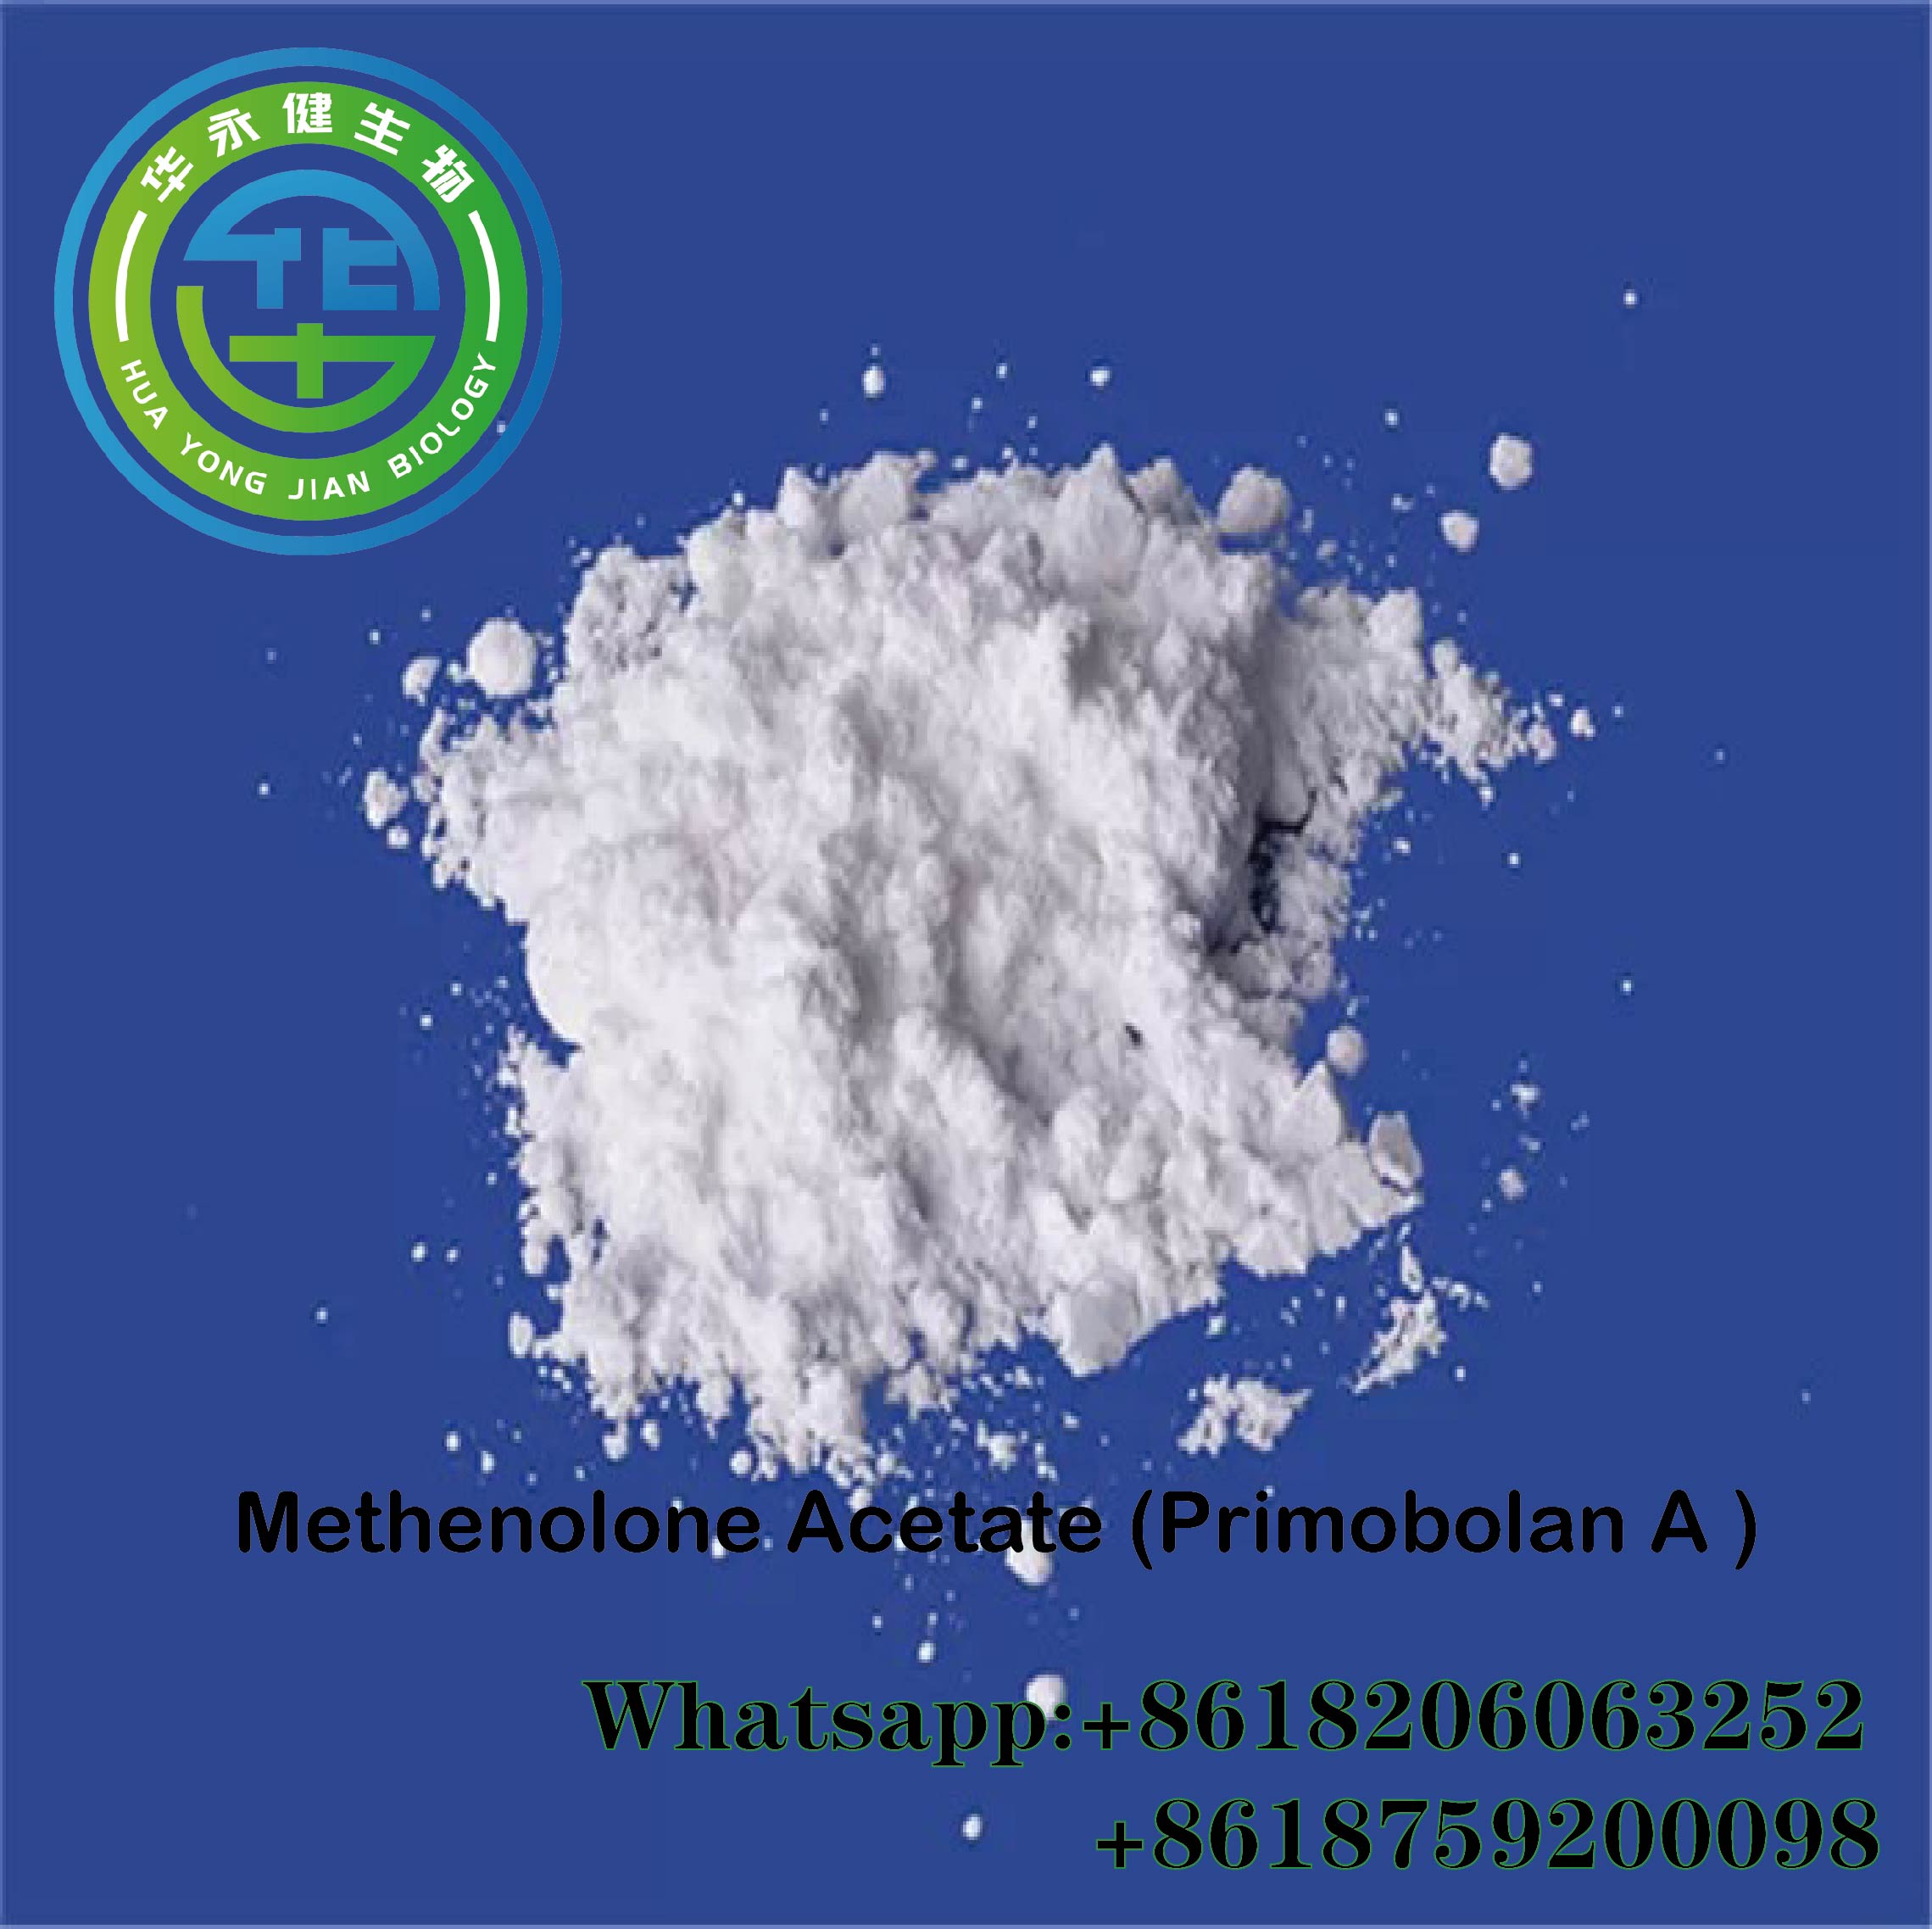 Raw Powder Methenolone Acetate CAS 434-05-9 Steroids for Muscle Gain Repeat Order with Fast Delivery to Brazil Safely